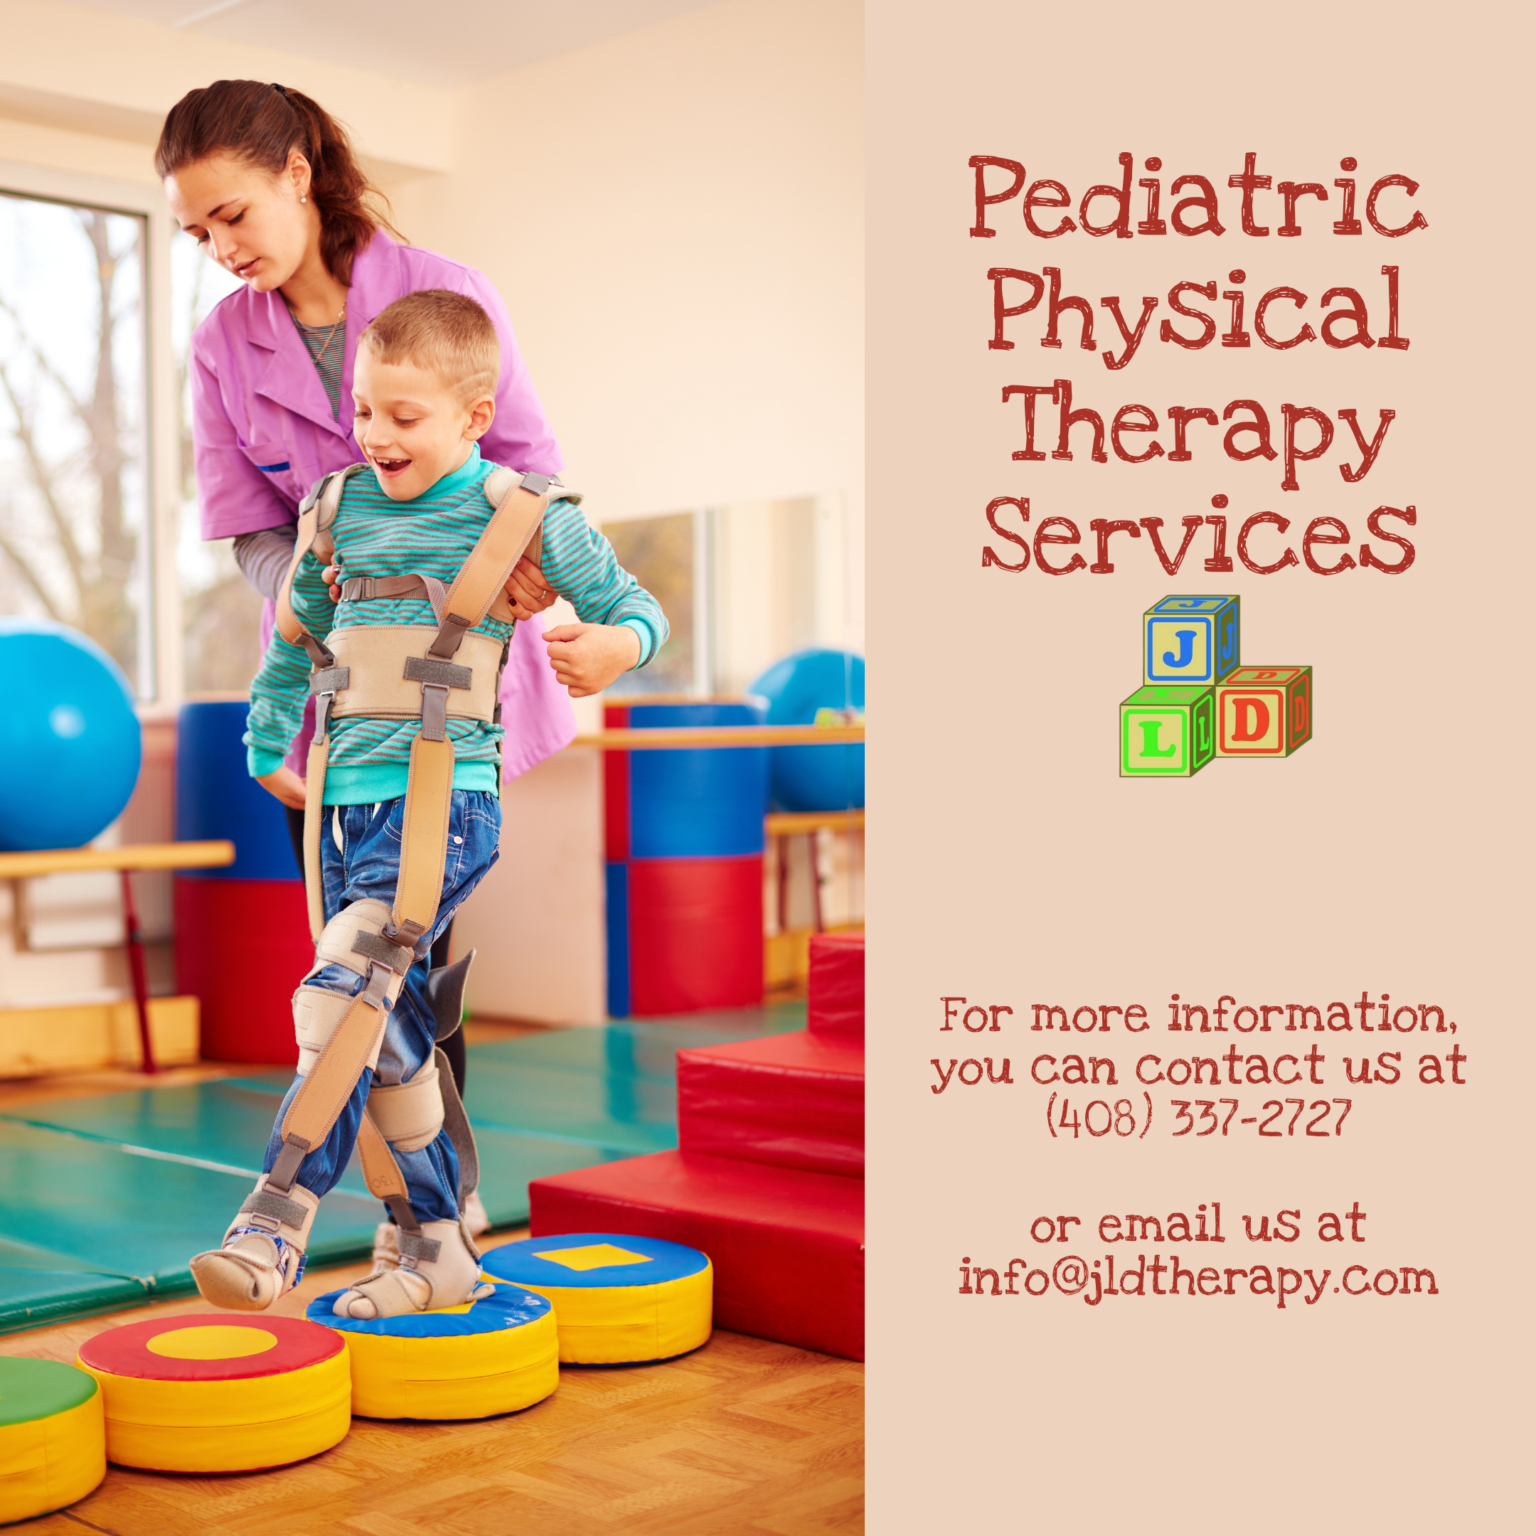 JLD Pediatric Physical Therapy Services 1536x1536 